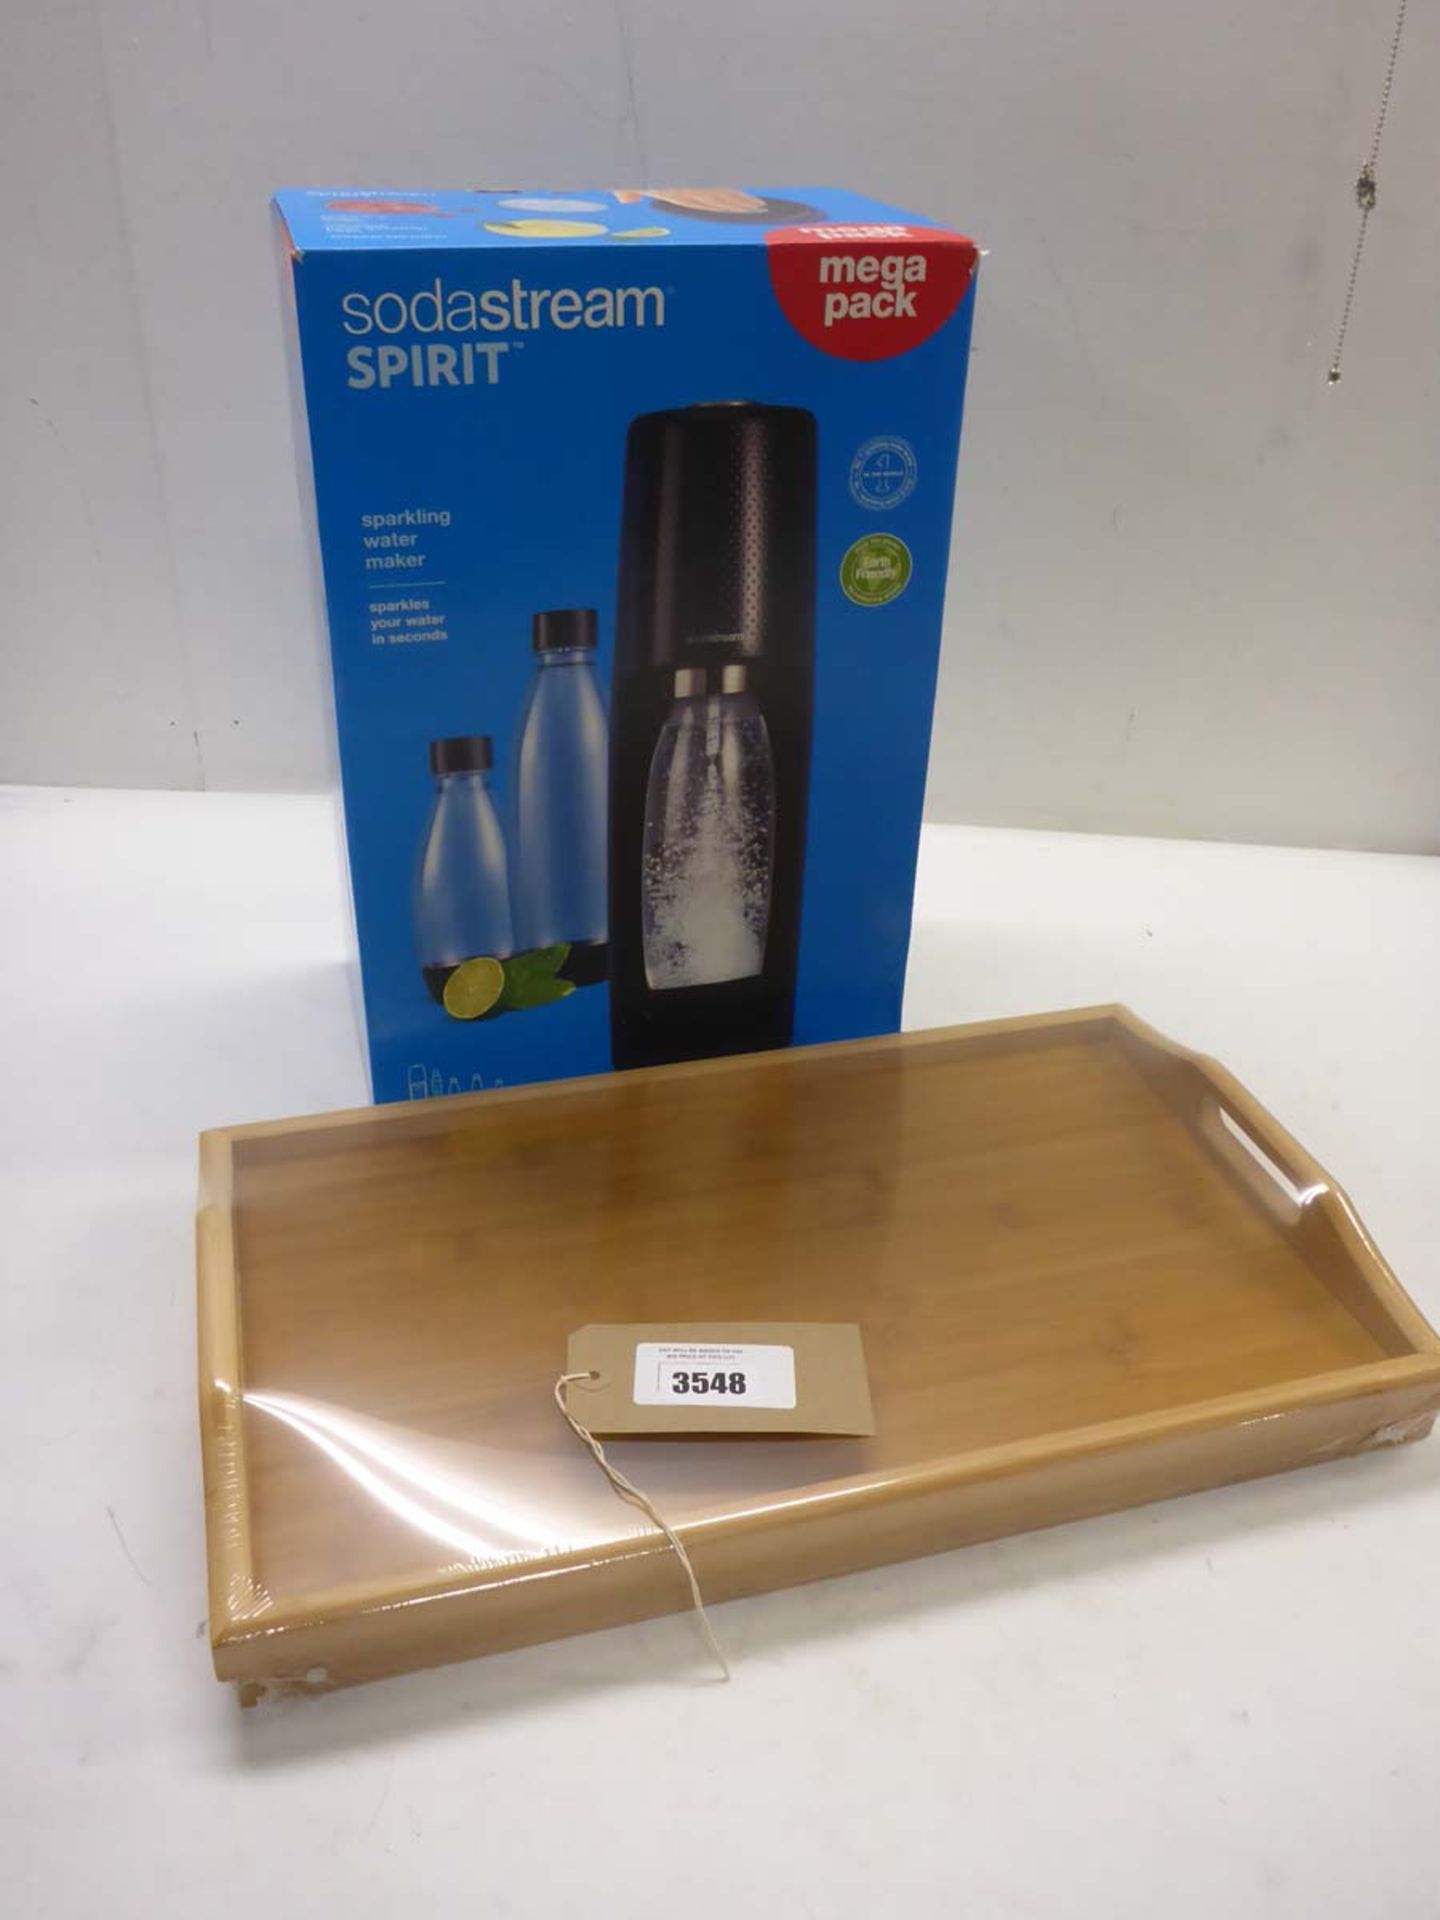 Sodastream Spirit sparking water maker and bamboo fold up tray